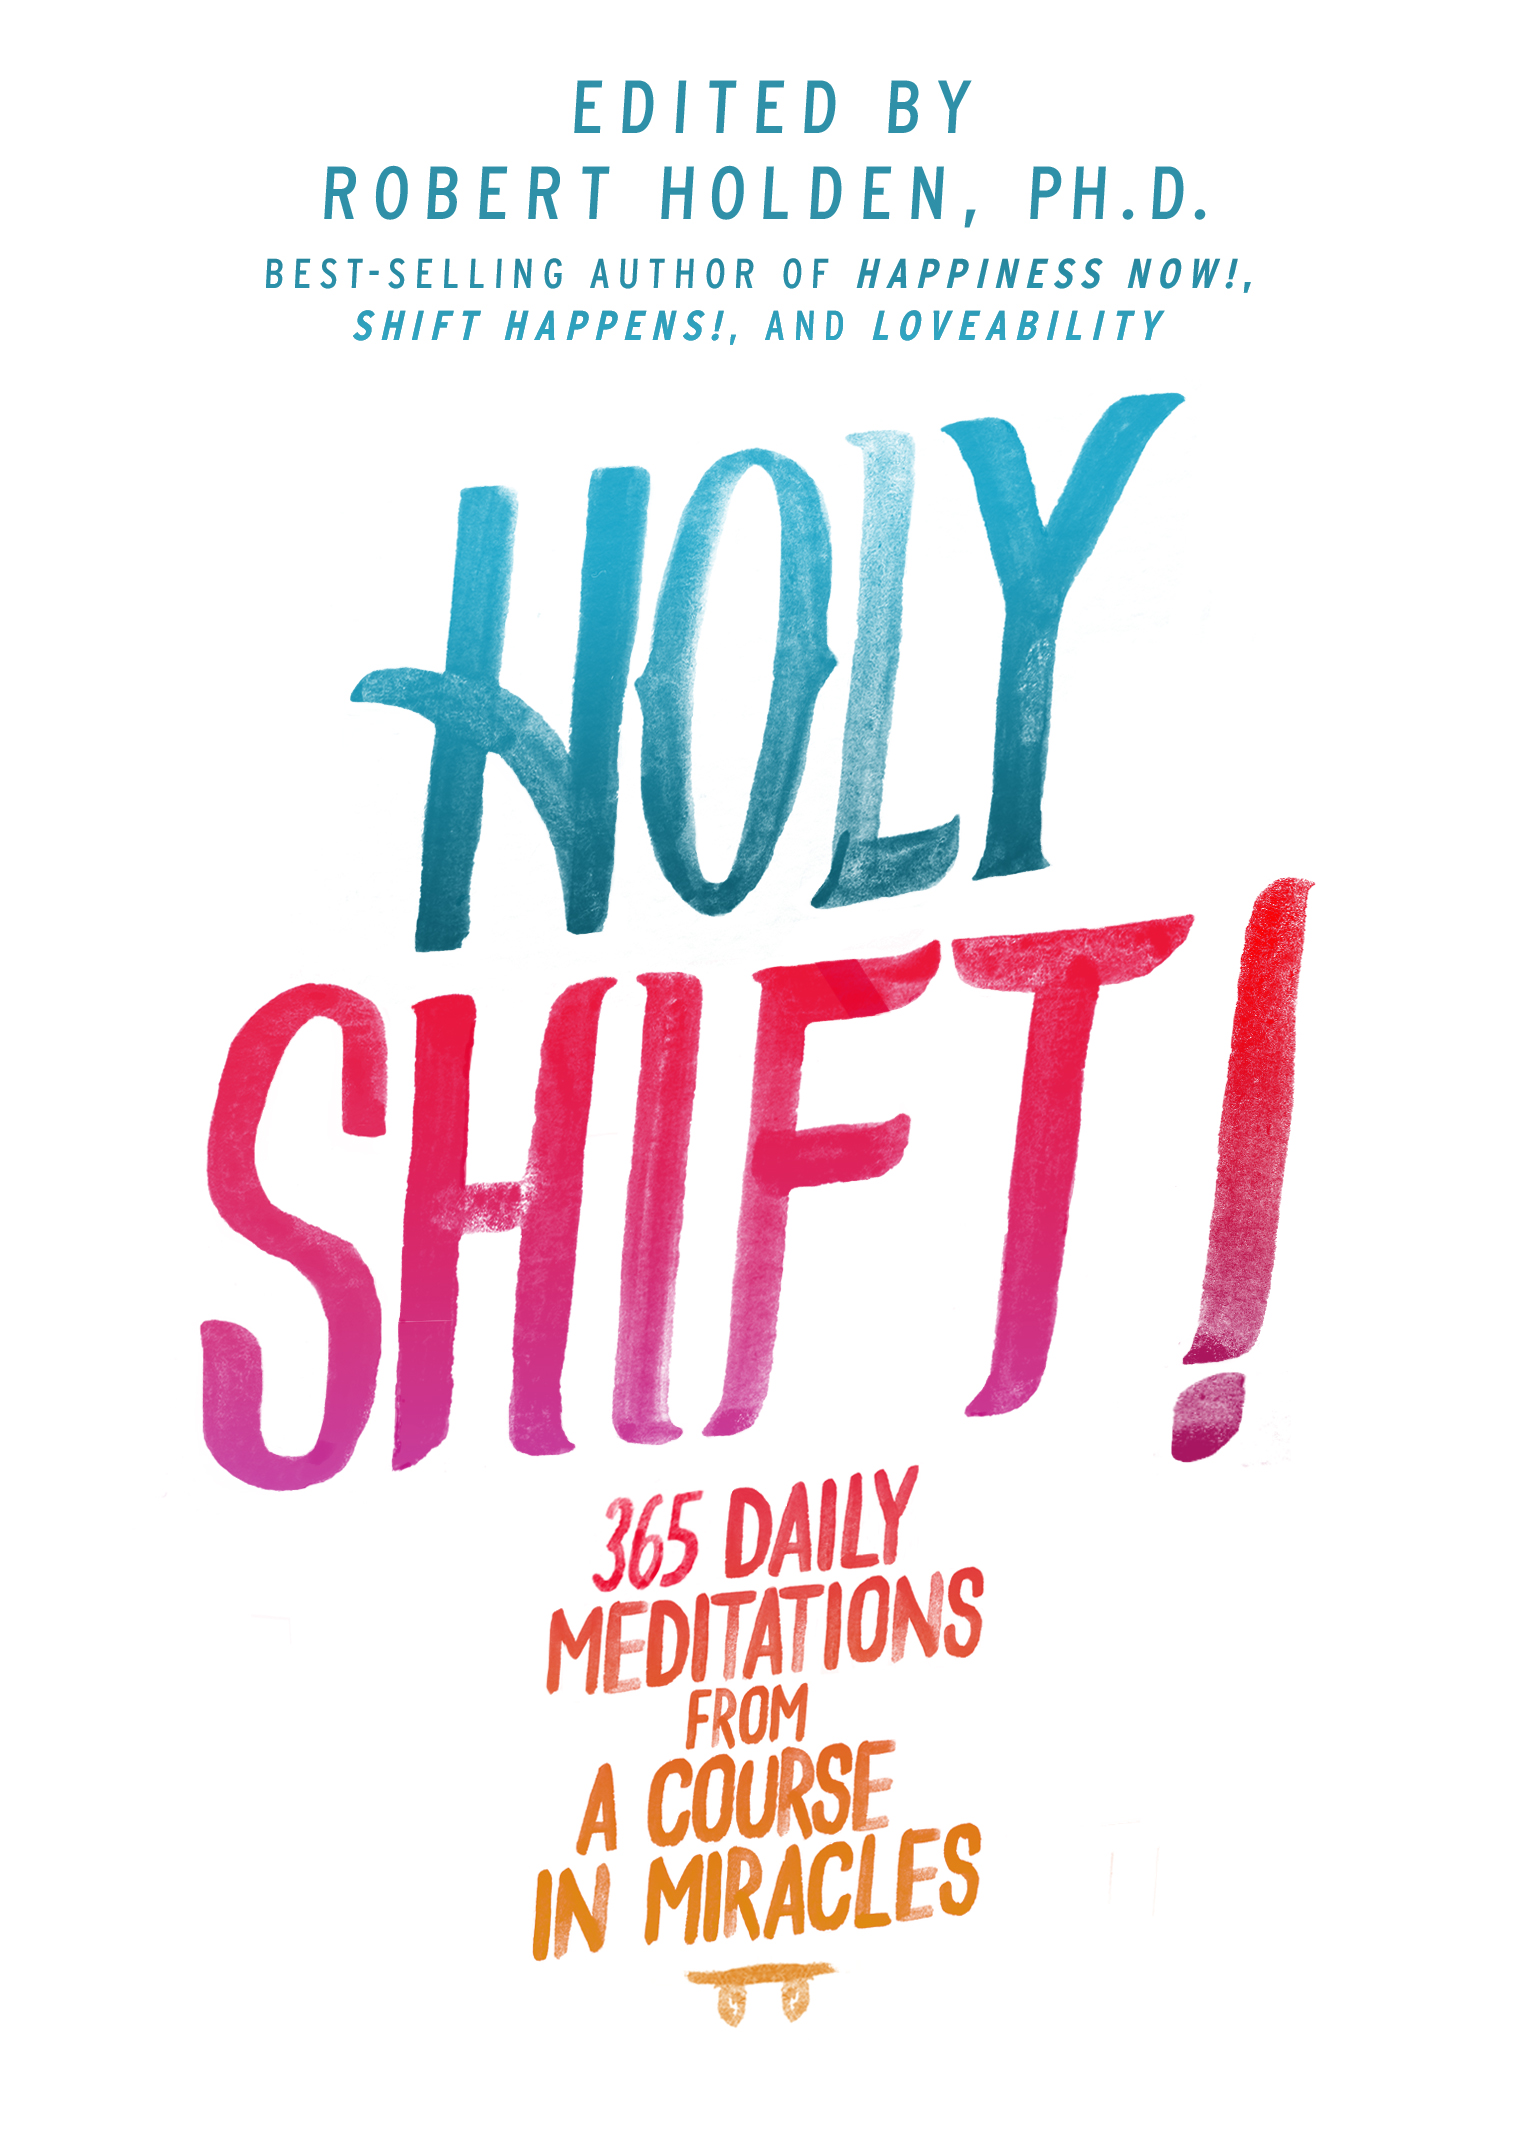 Holy Shift! 365 Daily Meditations From a Course in Miracles